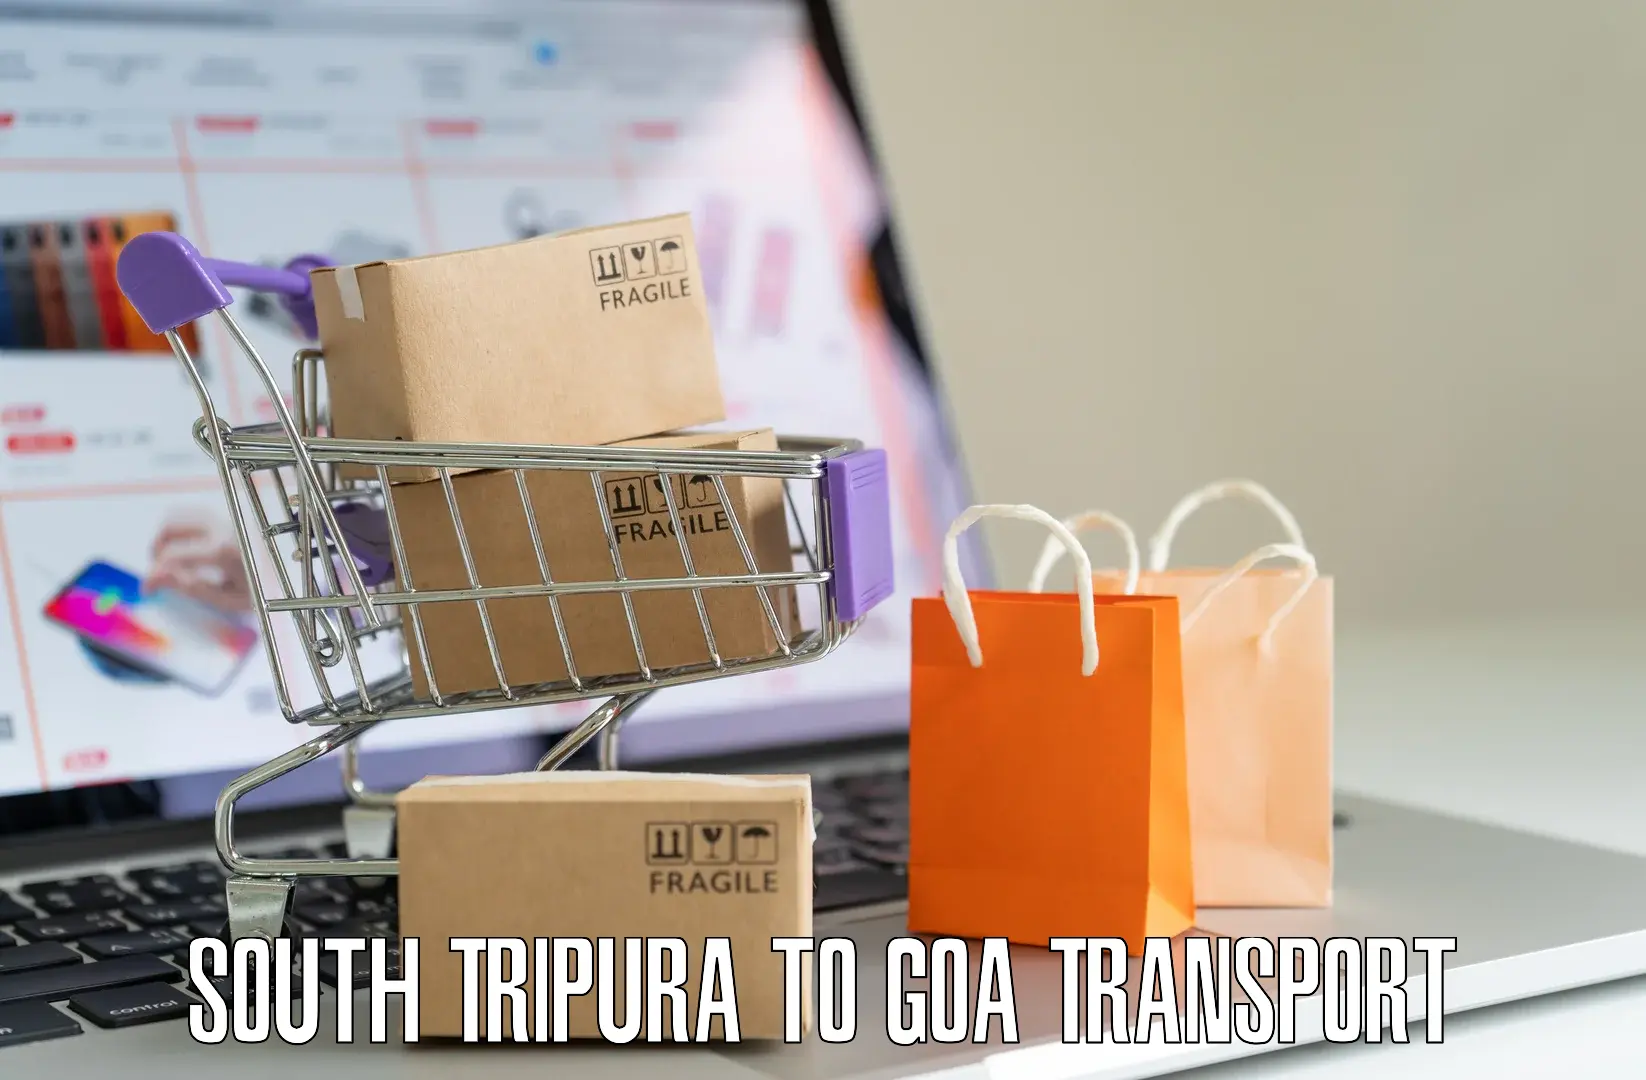 Commercial transport service South Tripura to Bardez